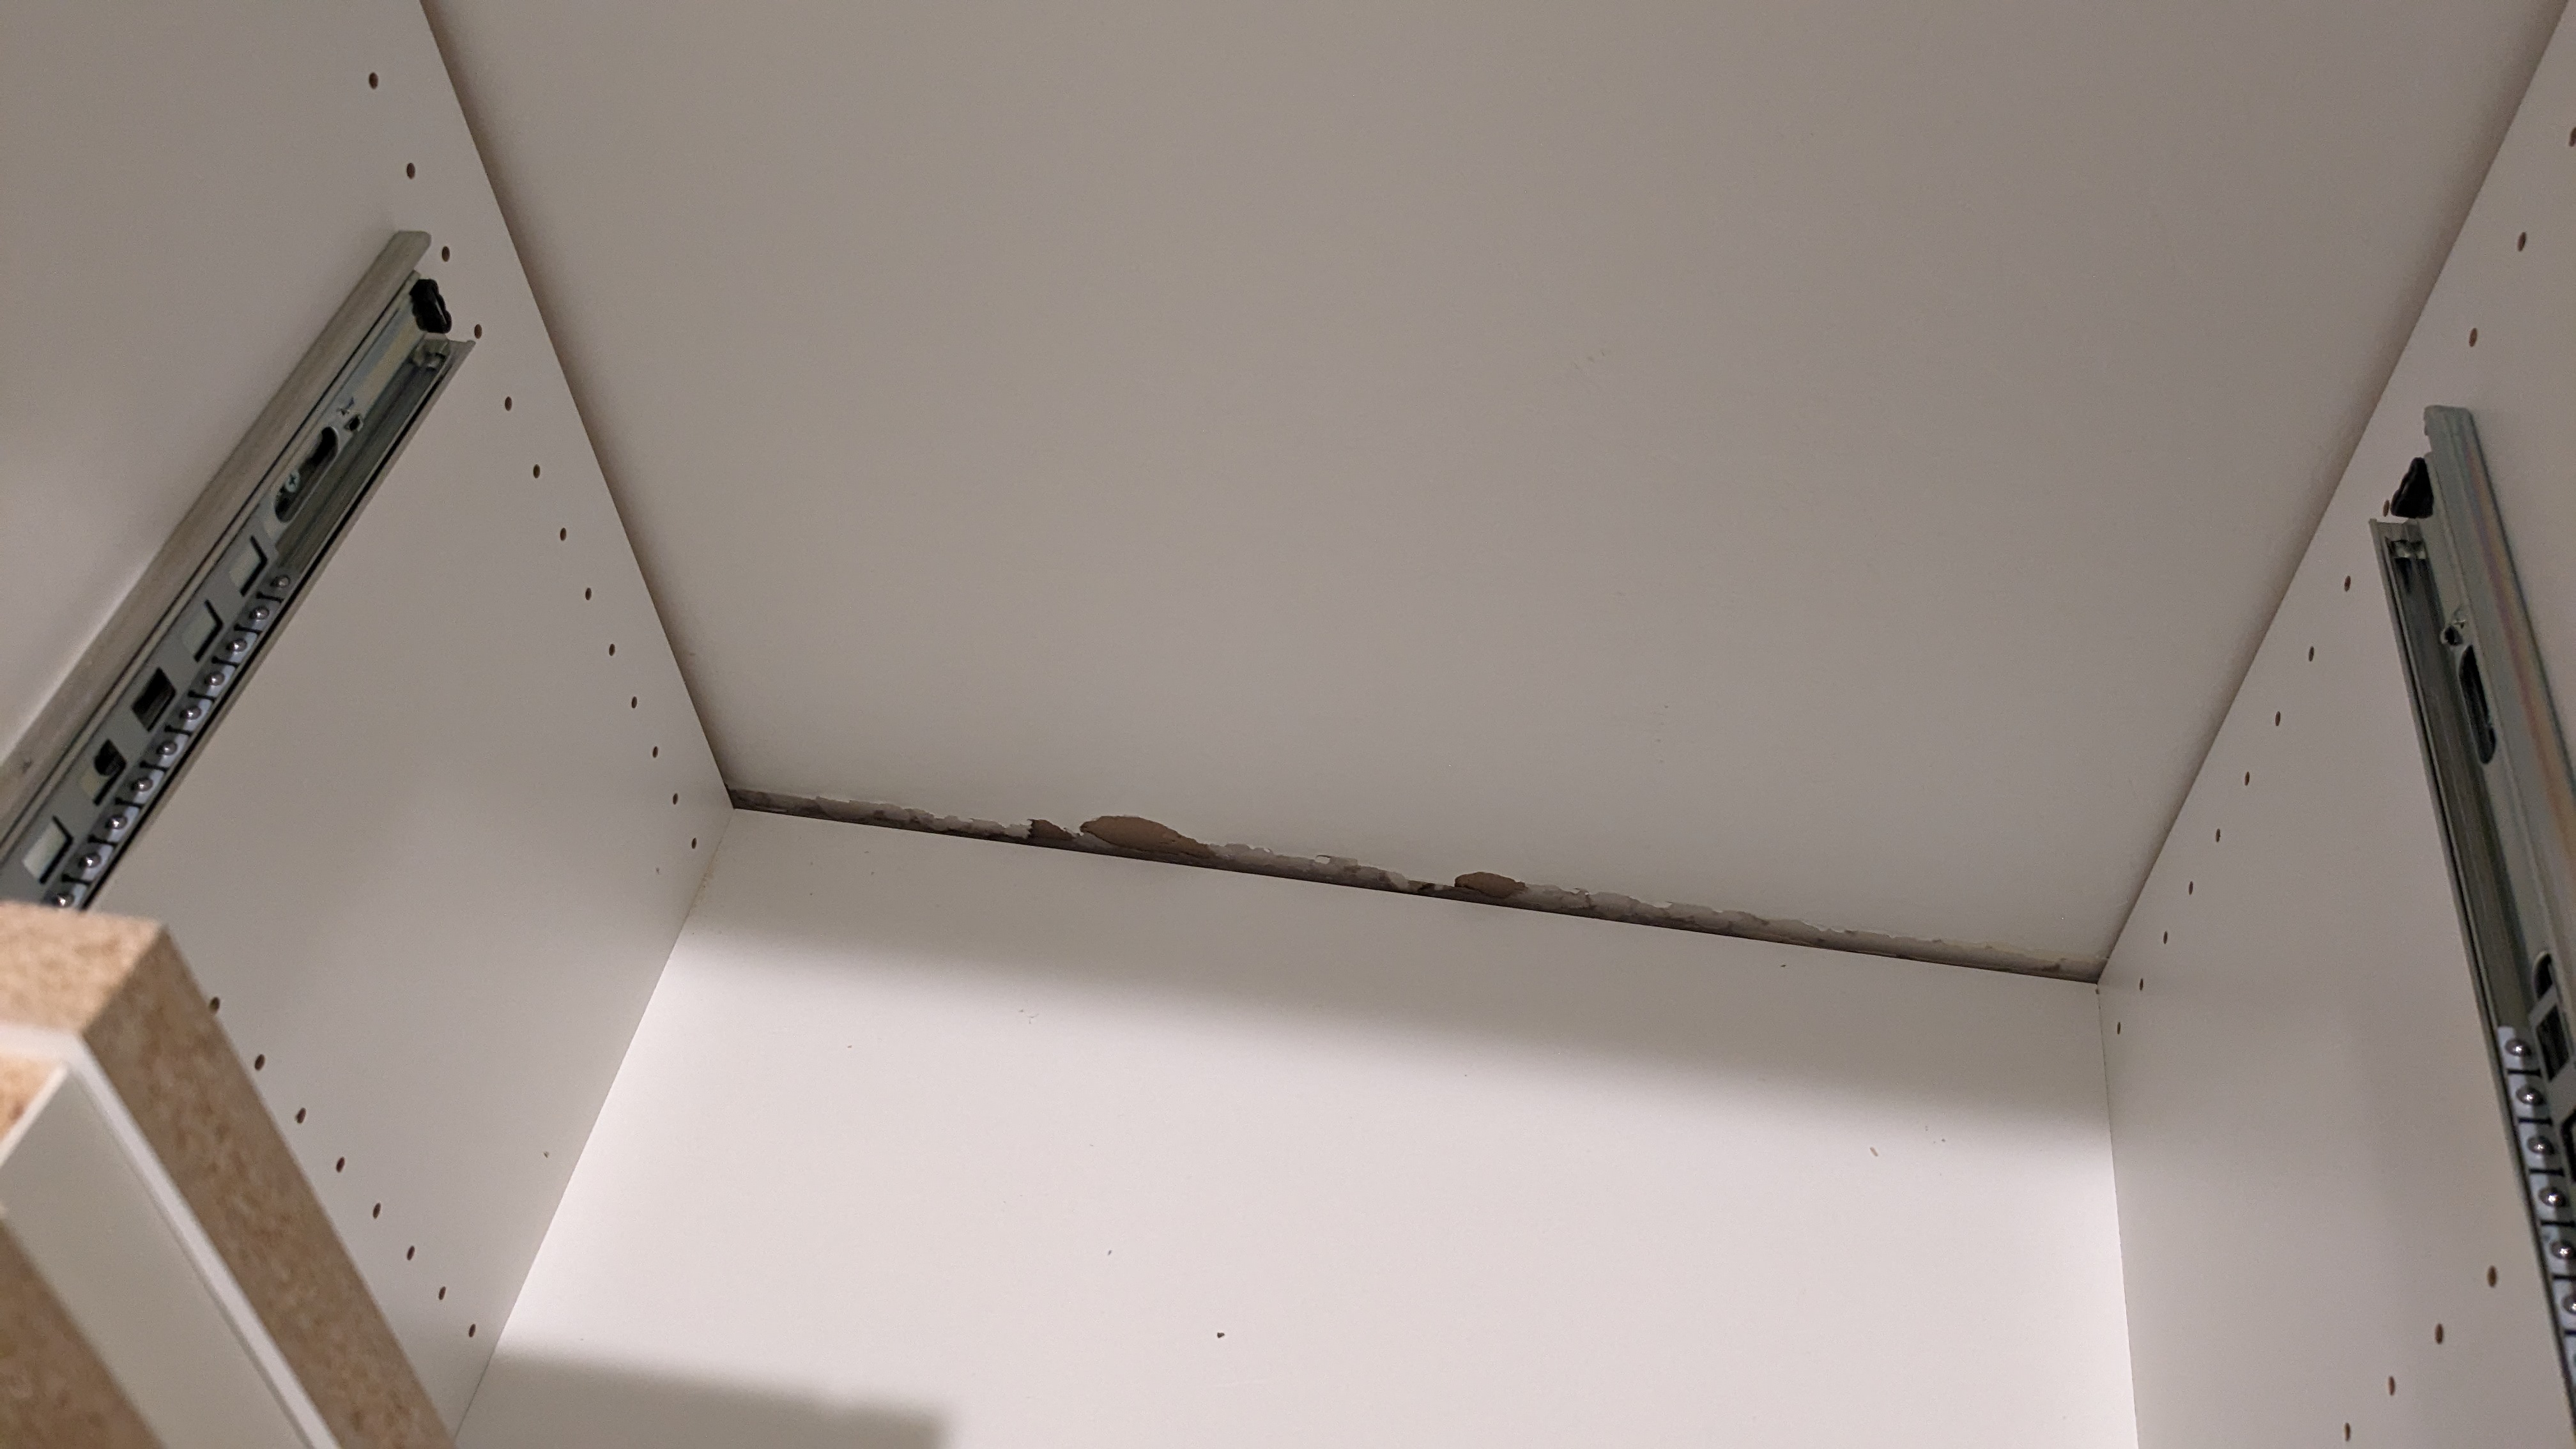 Unauthorized Baseboard Removal, Drywall Damage